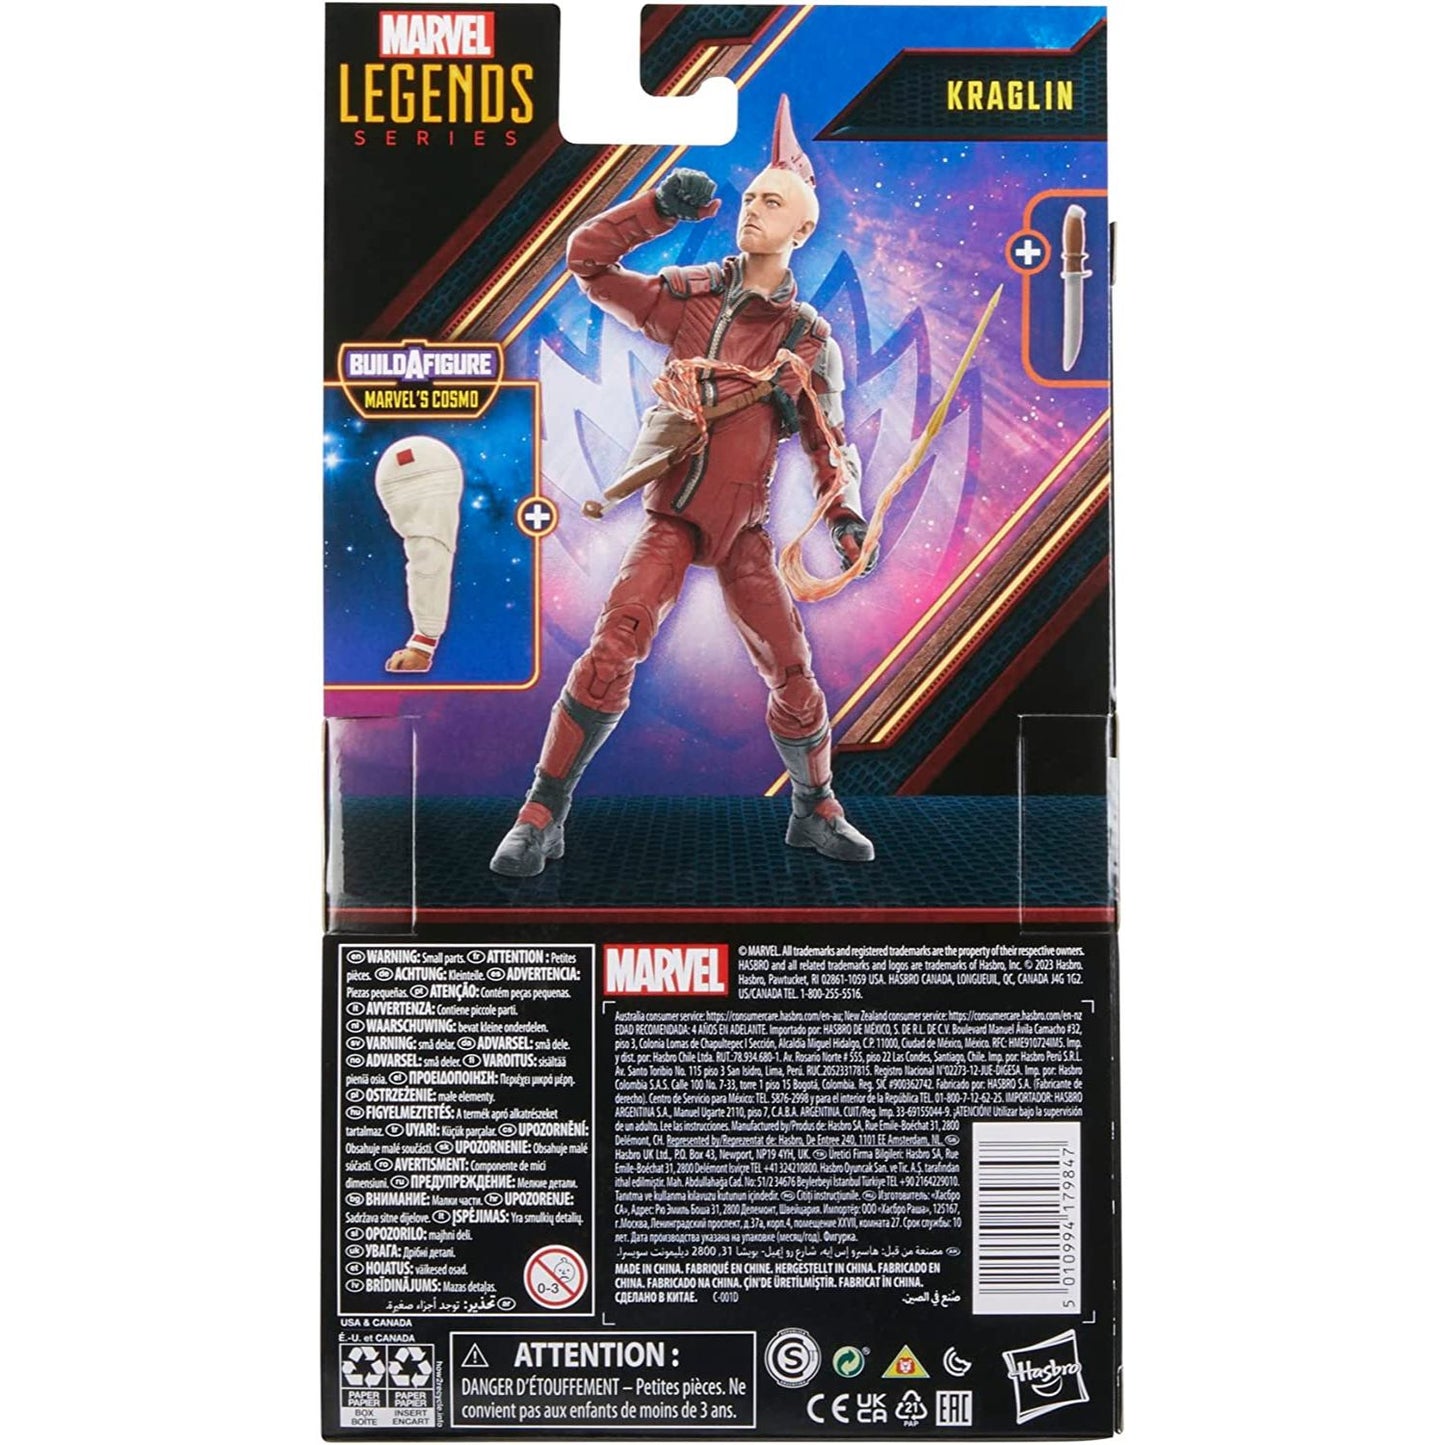 Guardians of the Galaxy Vol. 3 Marvel Legends Kraglin 6-Inch Action Figure in Box Back View - Heretoserveyou